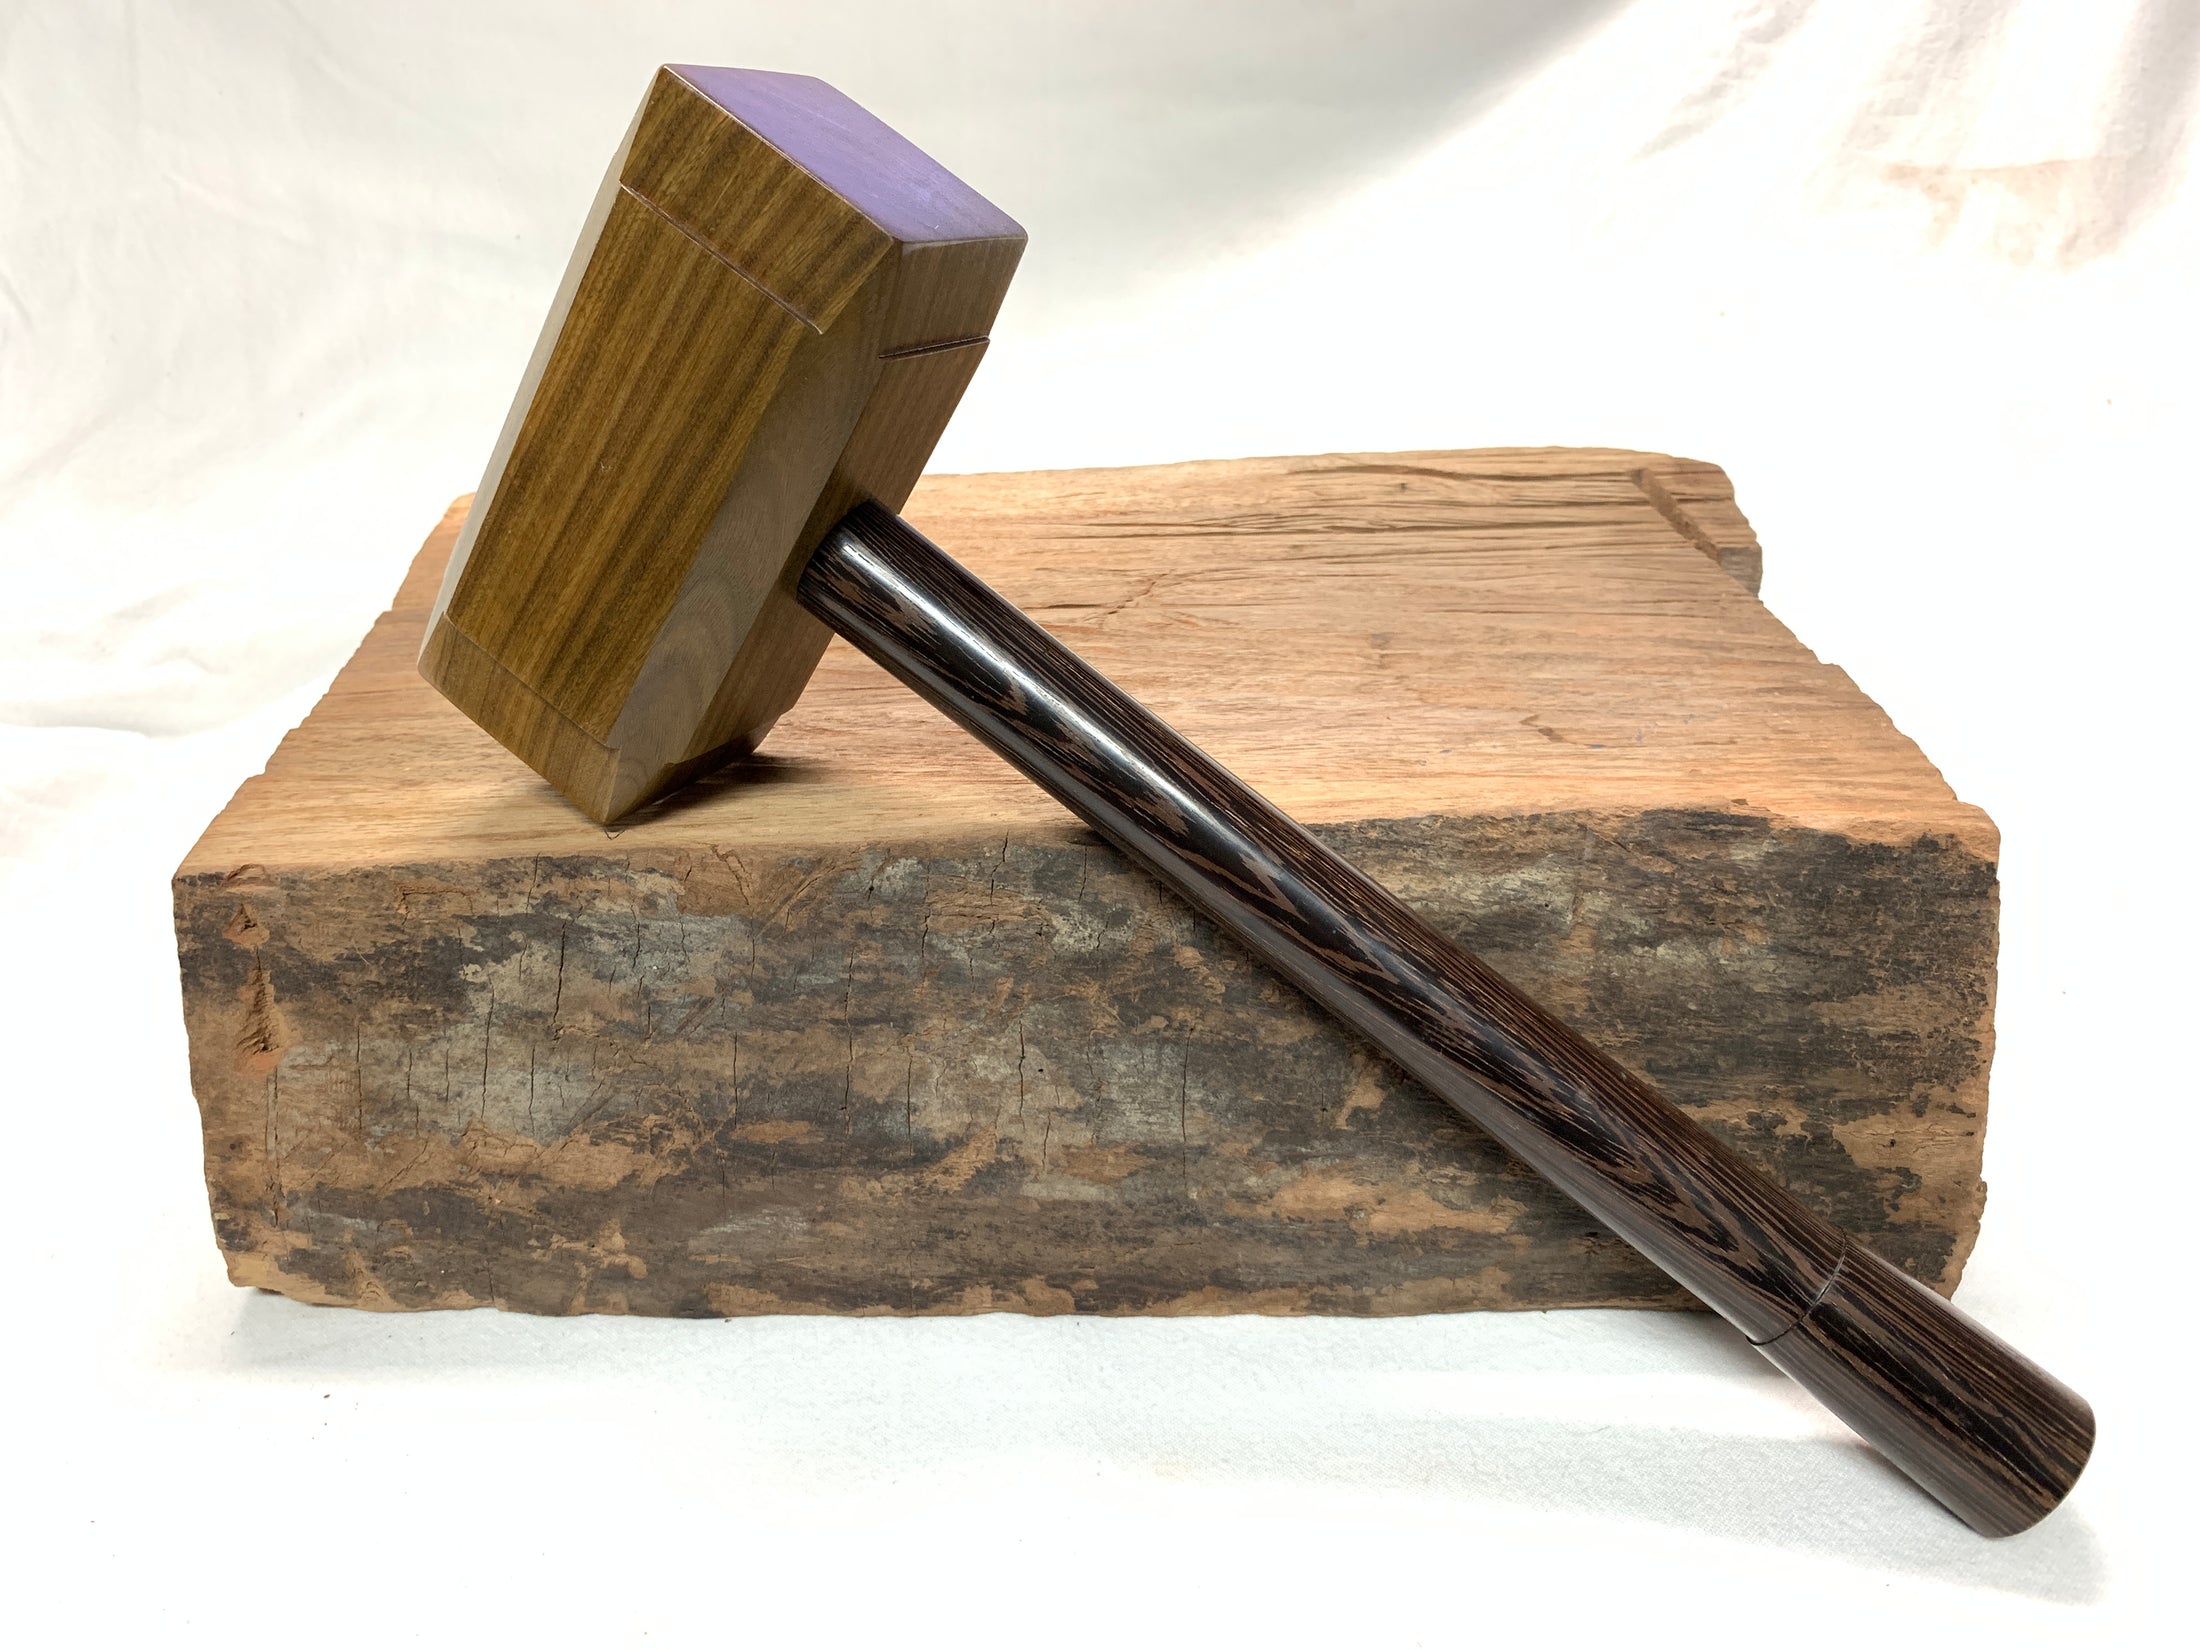 FULL SIZE -  Thor's Hammer Woodworking Mallet Mjolnir from Exotic Wood